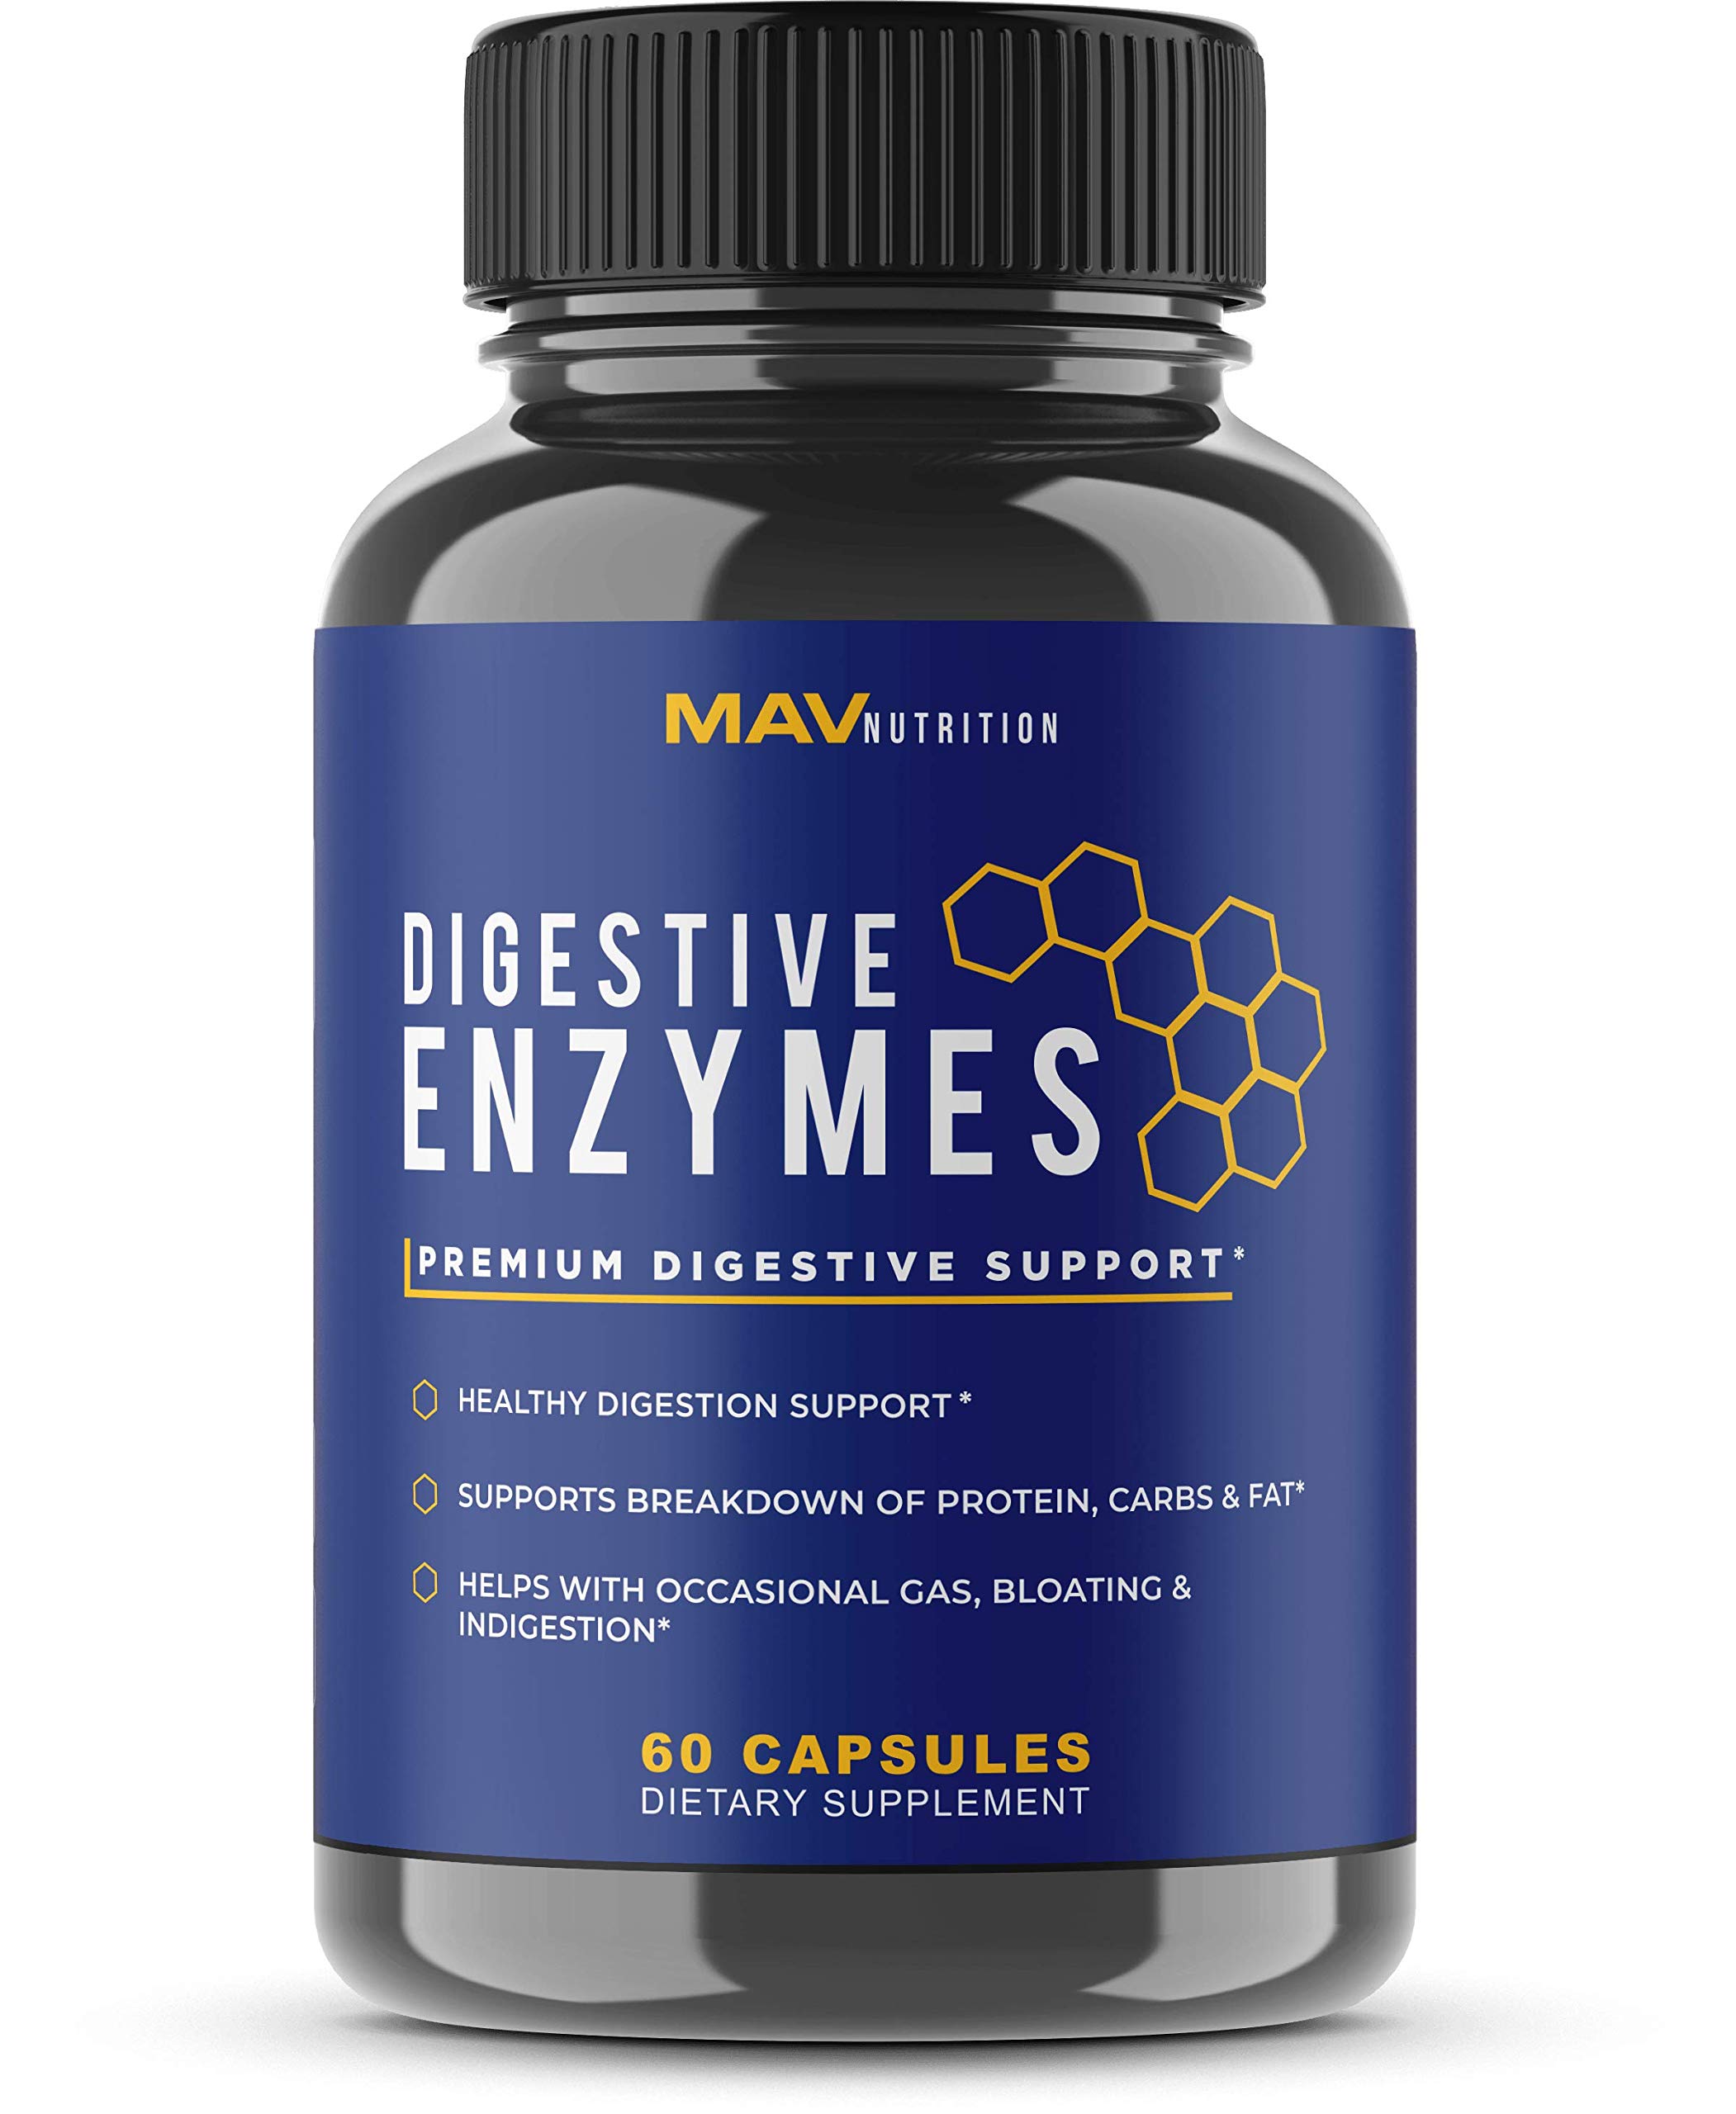 Digestive Enzymes Supplements: The Necessary Ingredients For The Modern Diet